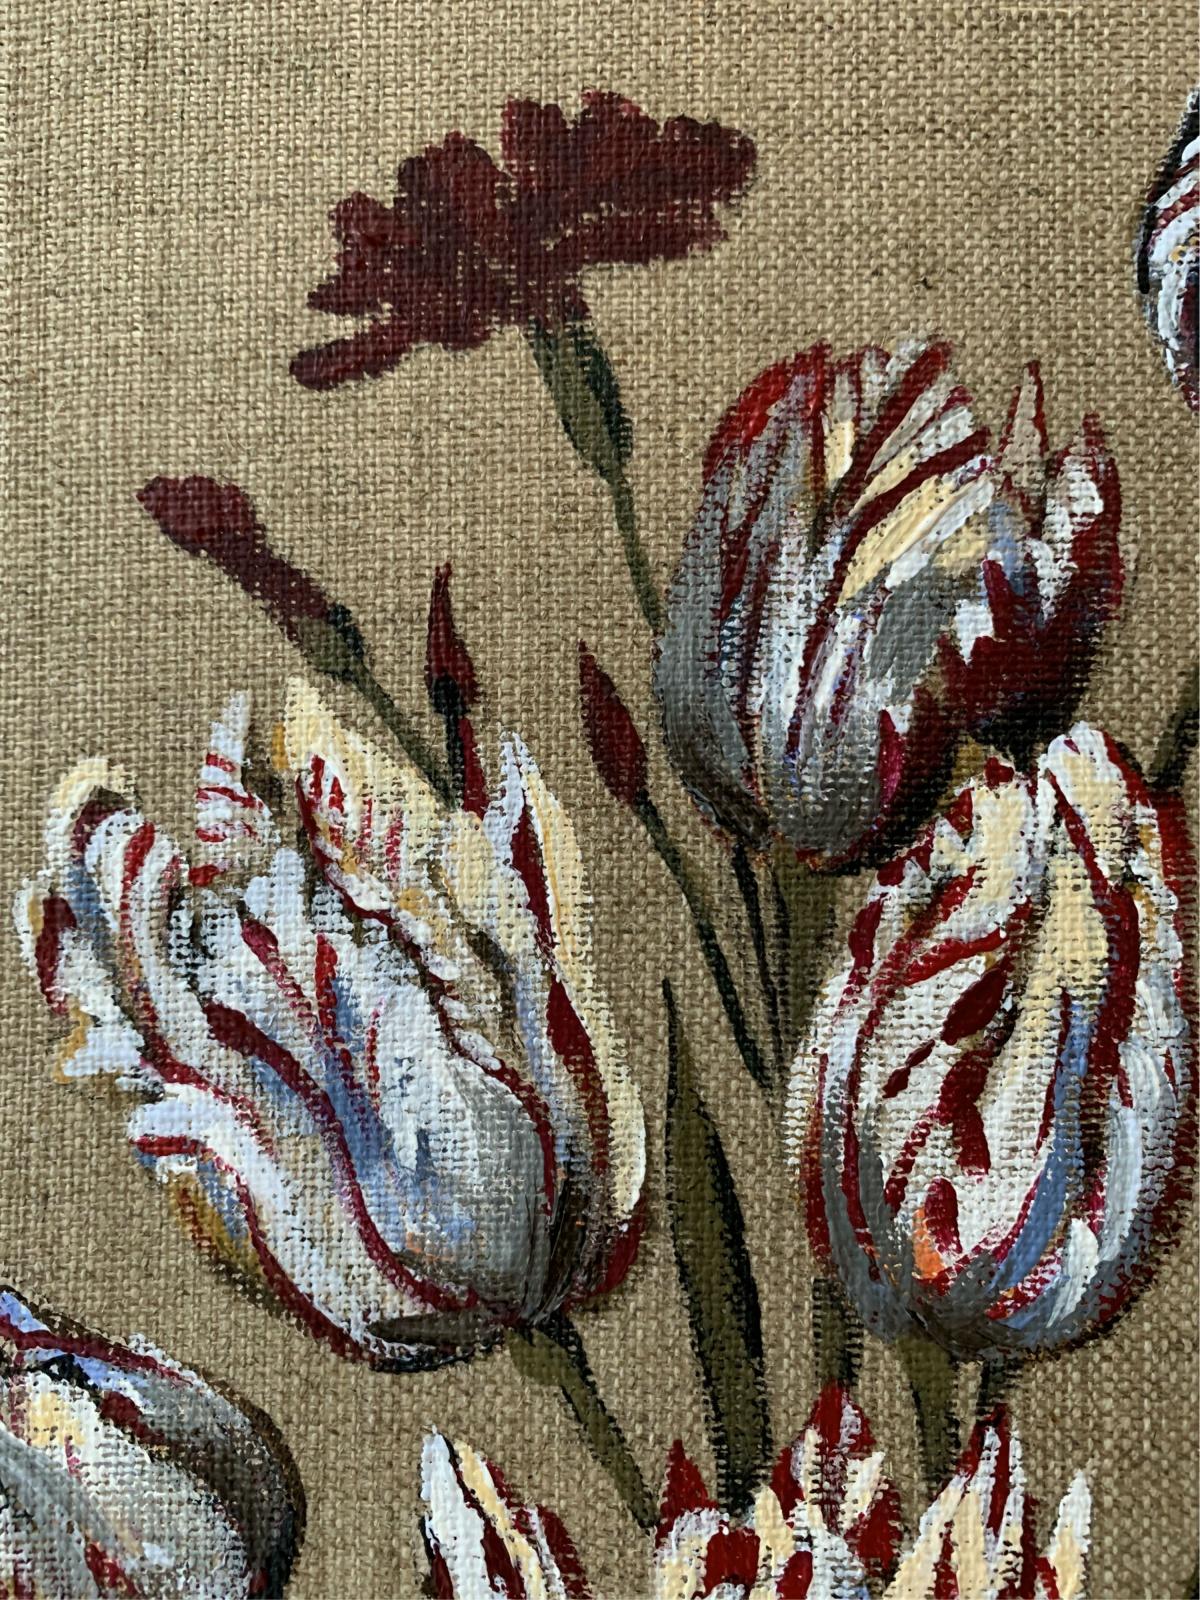 Tulips - Figurative acrylic painting, Realistic, Vibrant colors, Still life - Brown Still-Life Painting by Magdalena Nałęcz